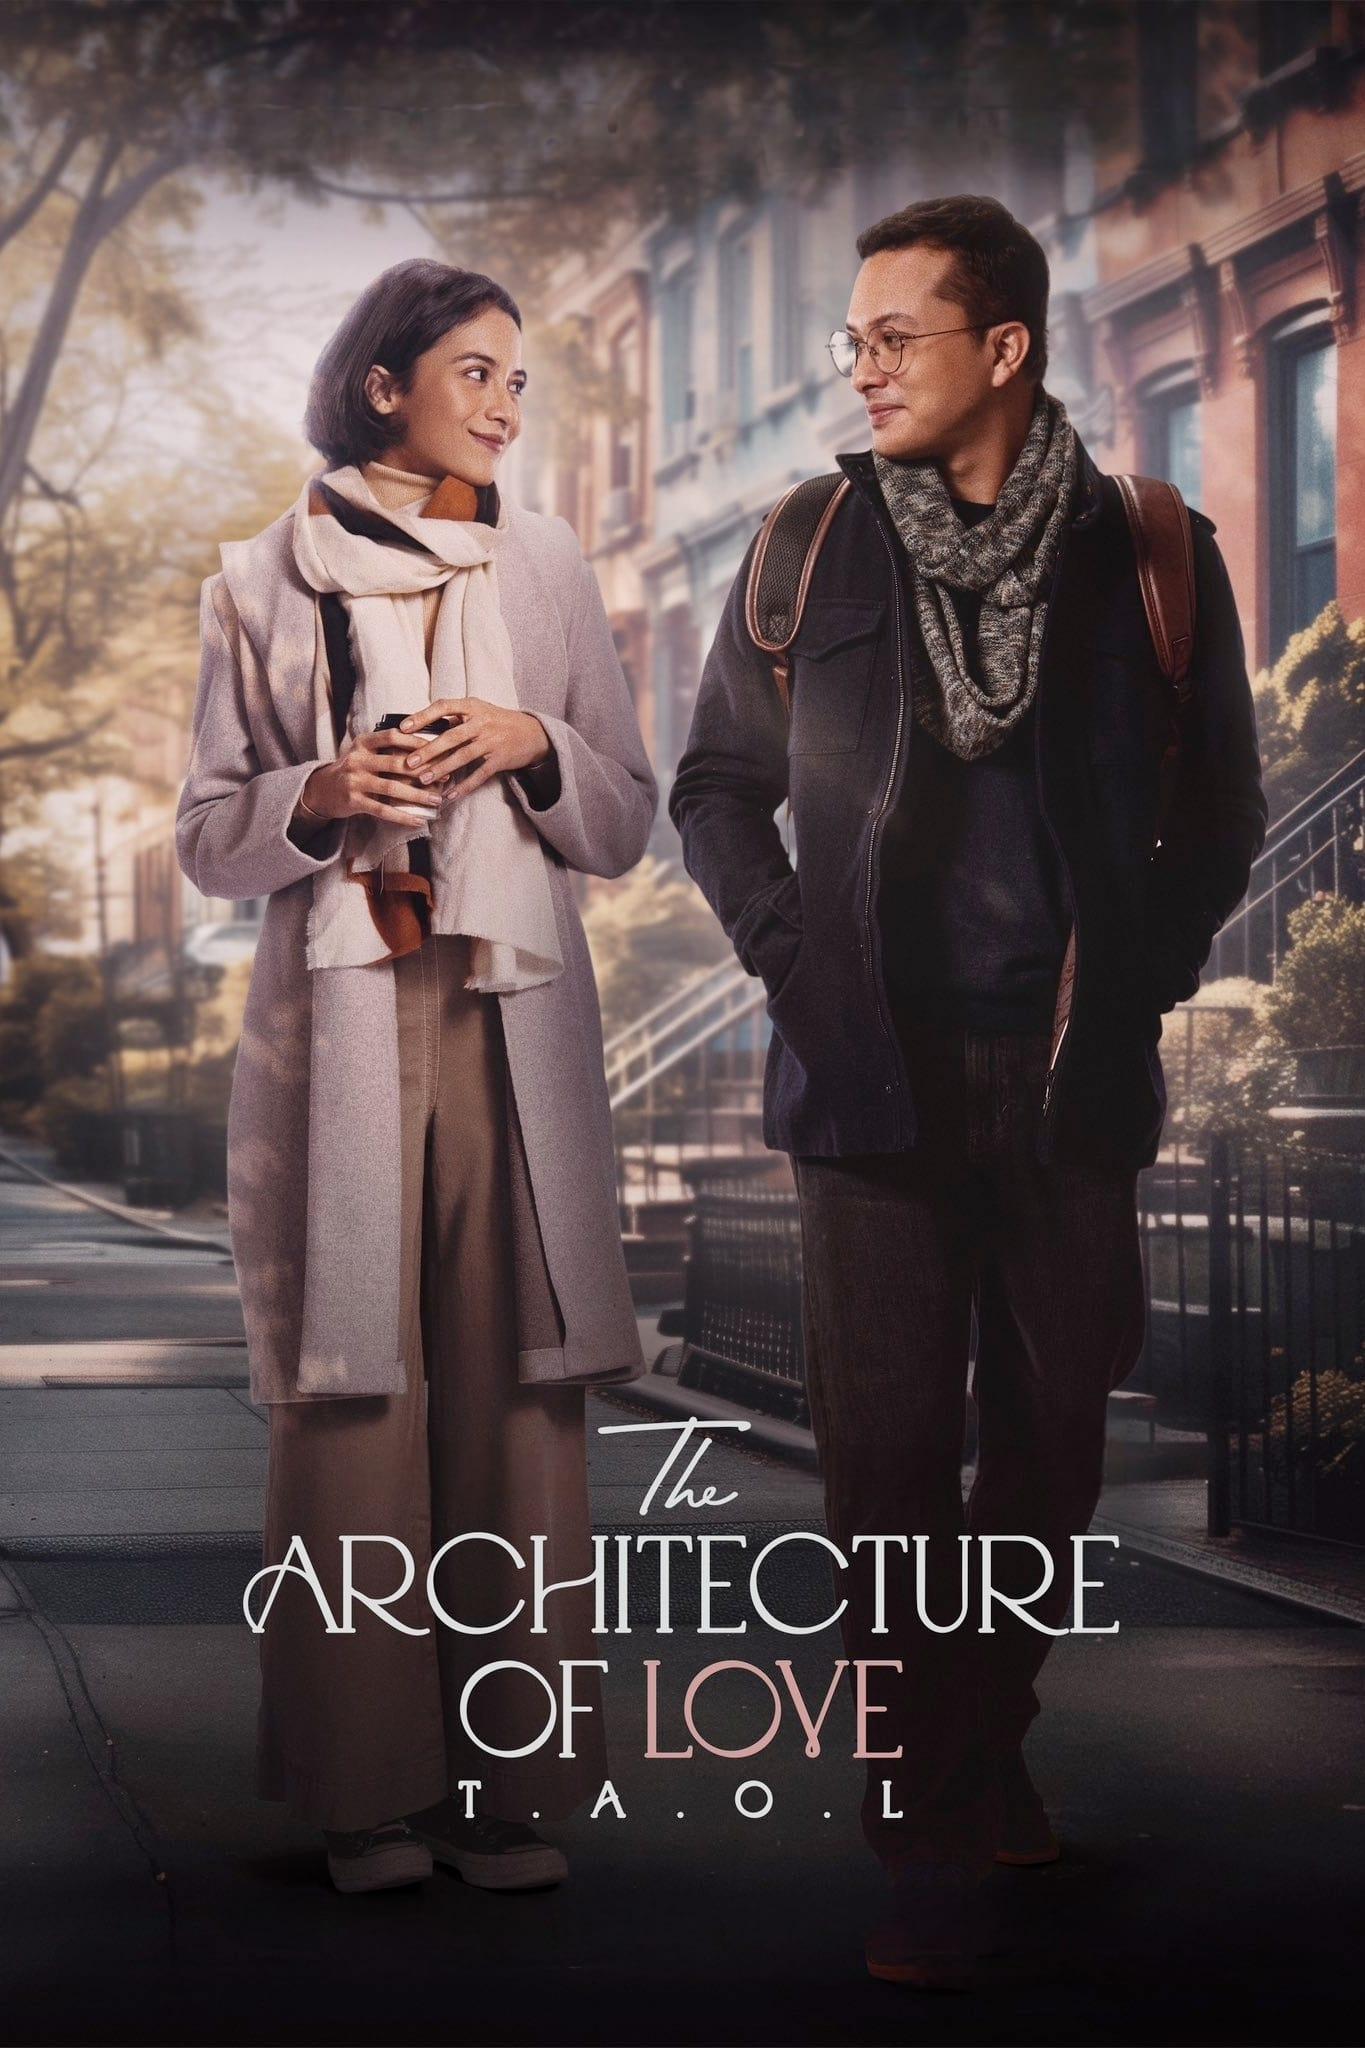 The Architecture of Love poster